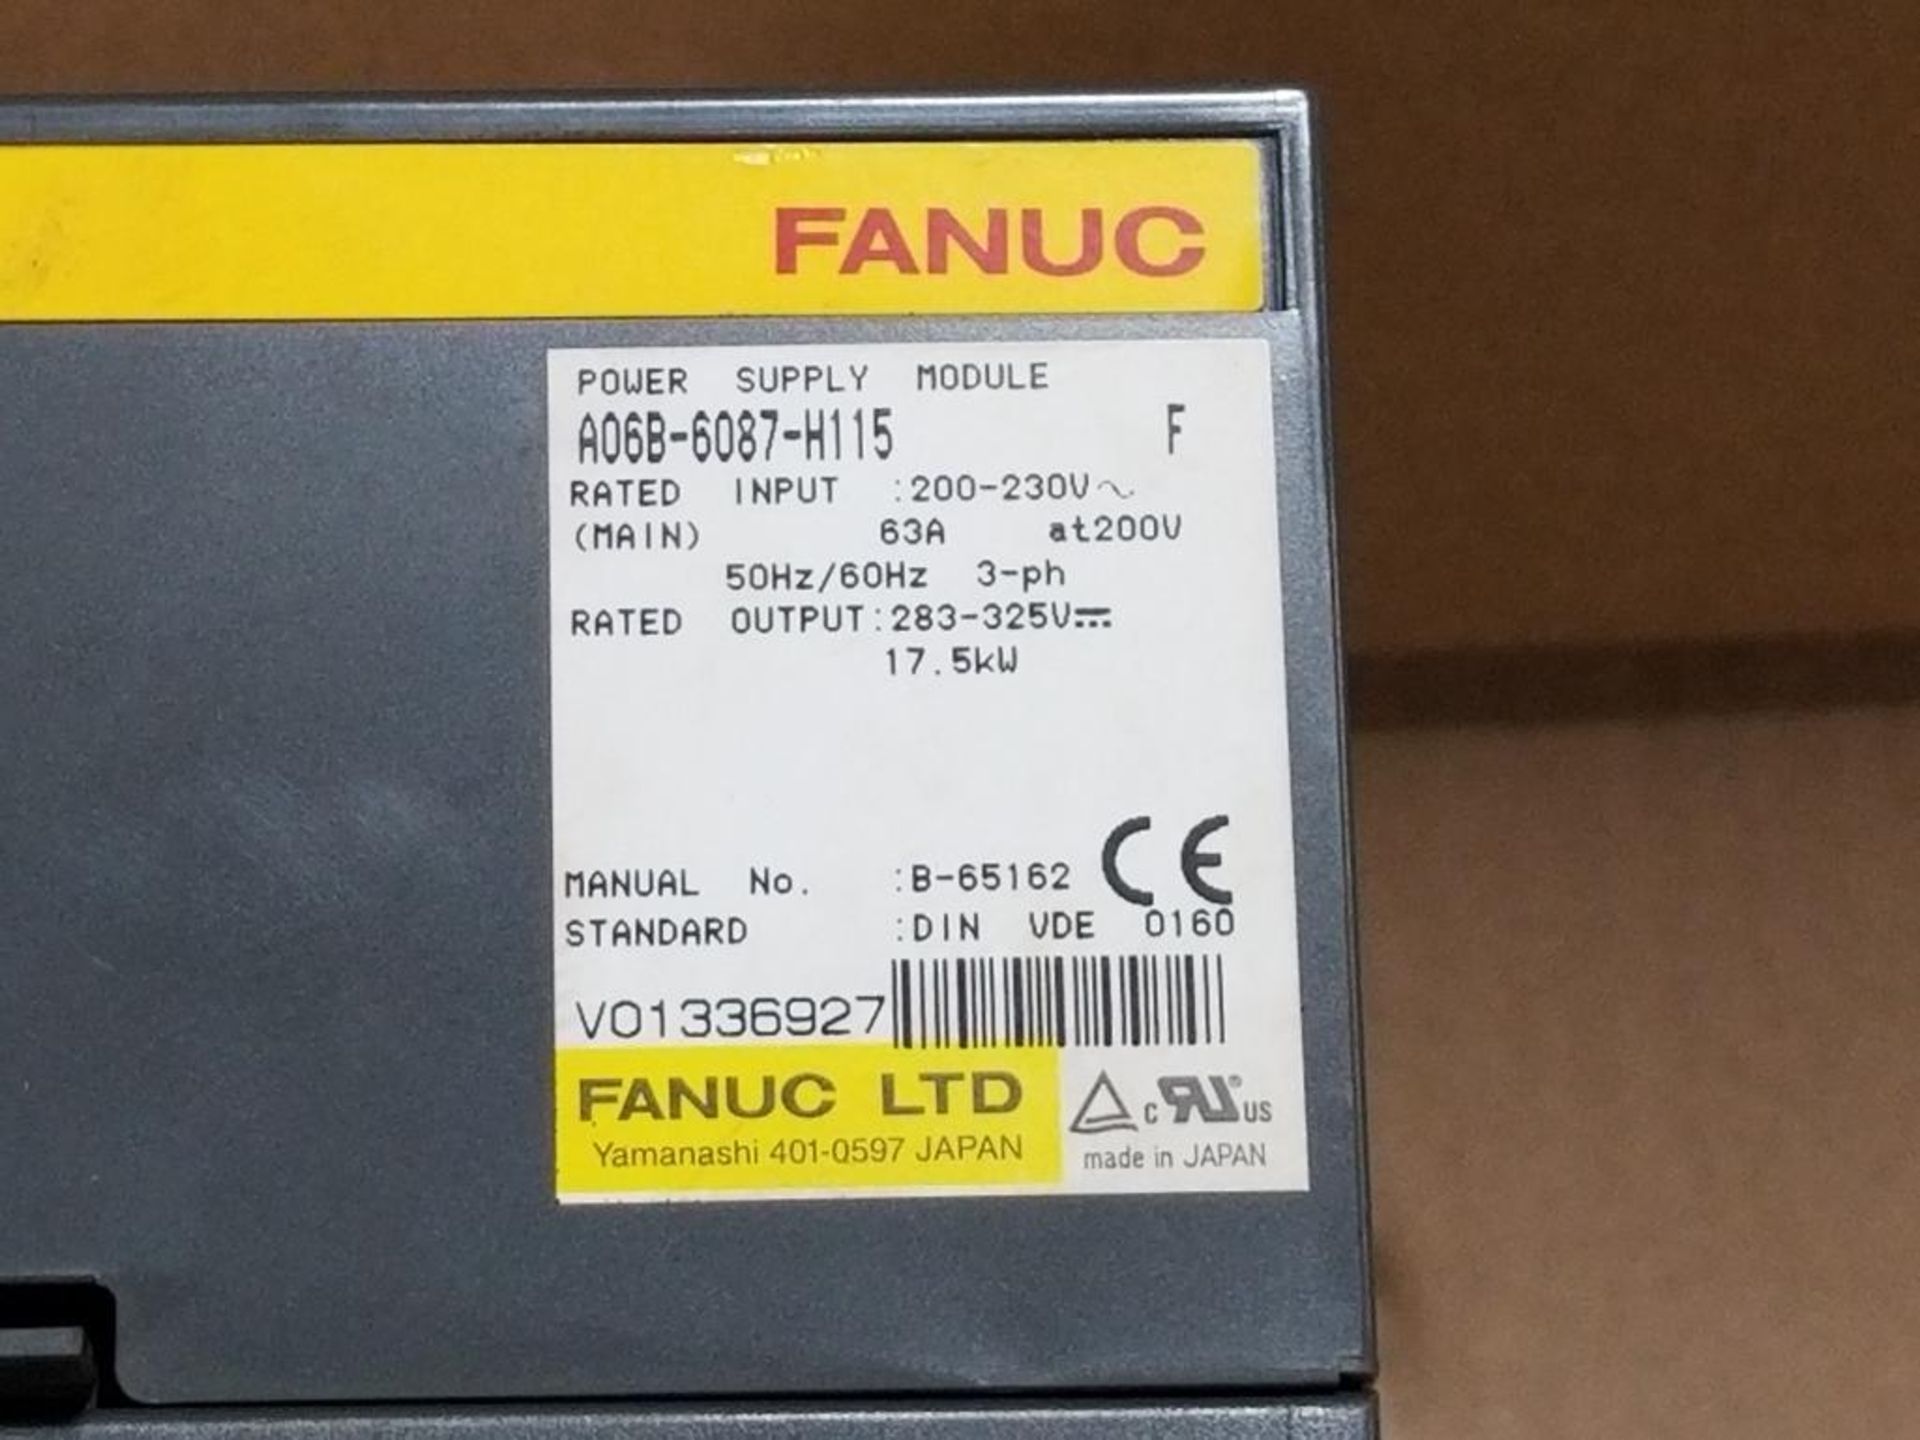 Fanuc A06B-6087-H115 power supply module. 17.5kW output. - Image 4 of 6